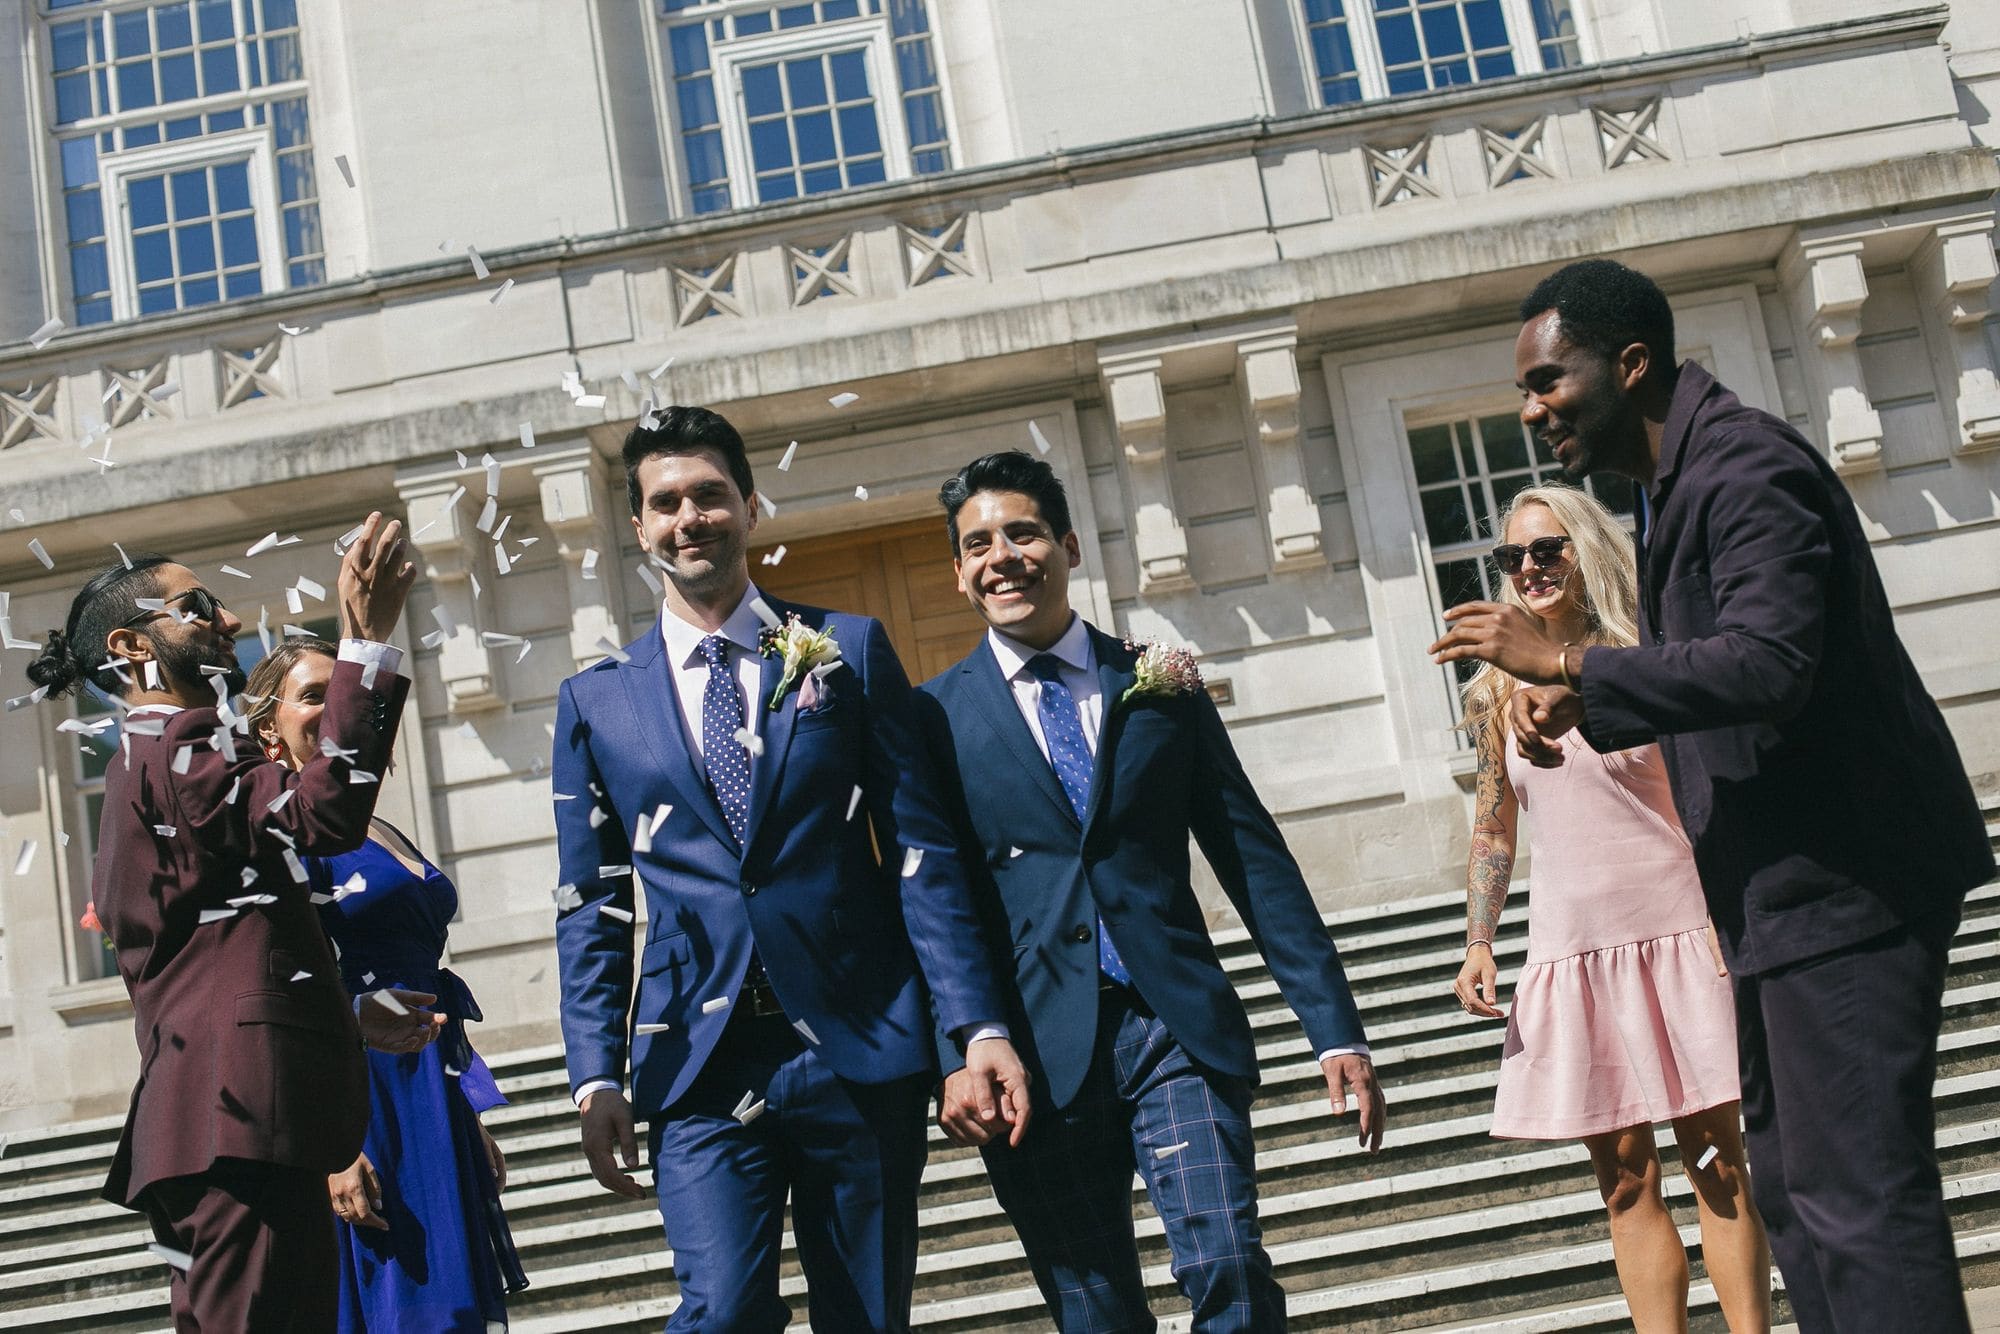 The 15 Best Cheap Wedding Reception in London 2022